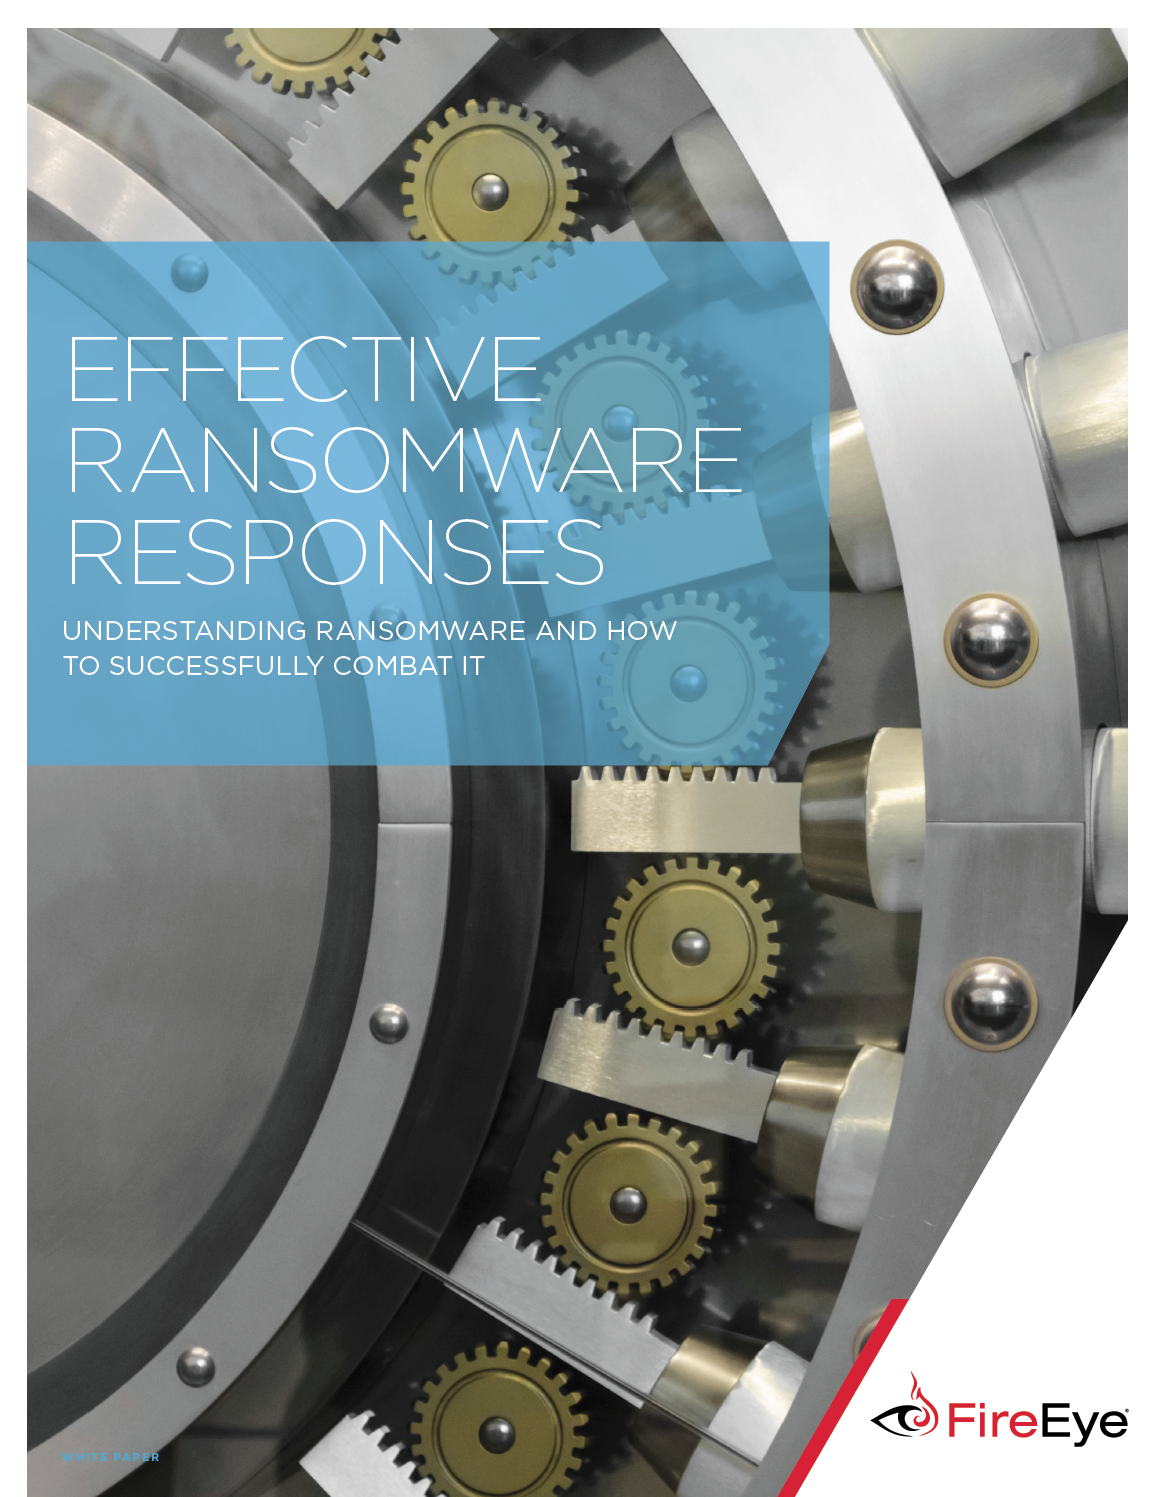 482818 rpt effective ransomware response Cover - EFFECTIVE RANSOMWARE RESPONSES